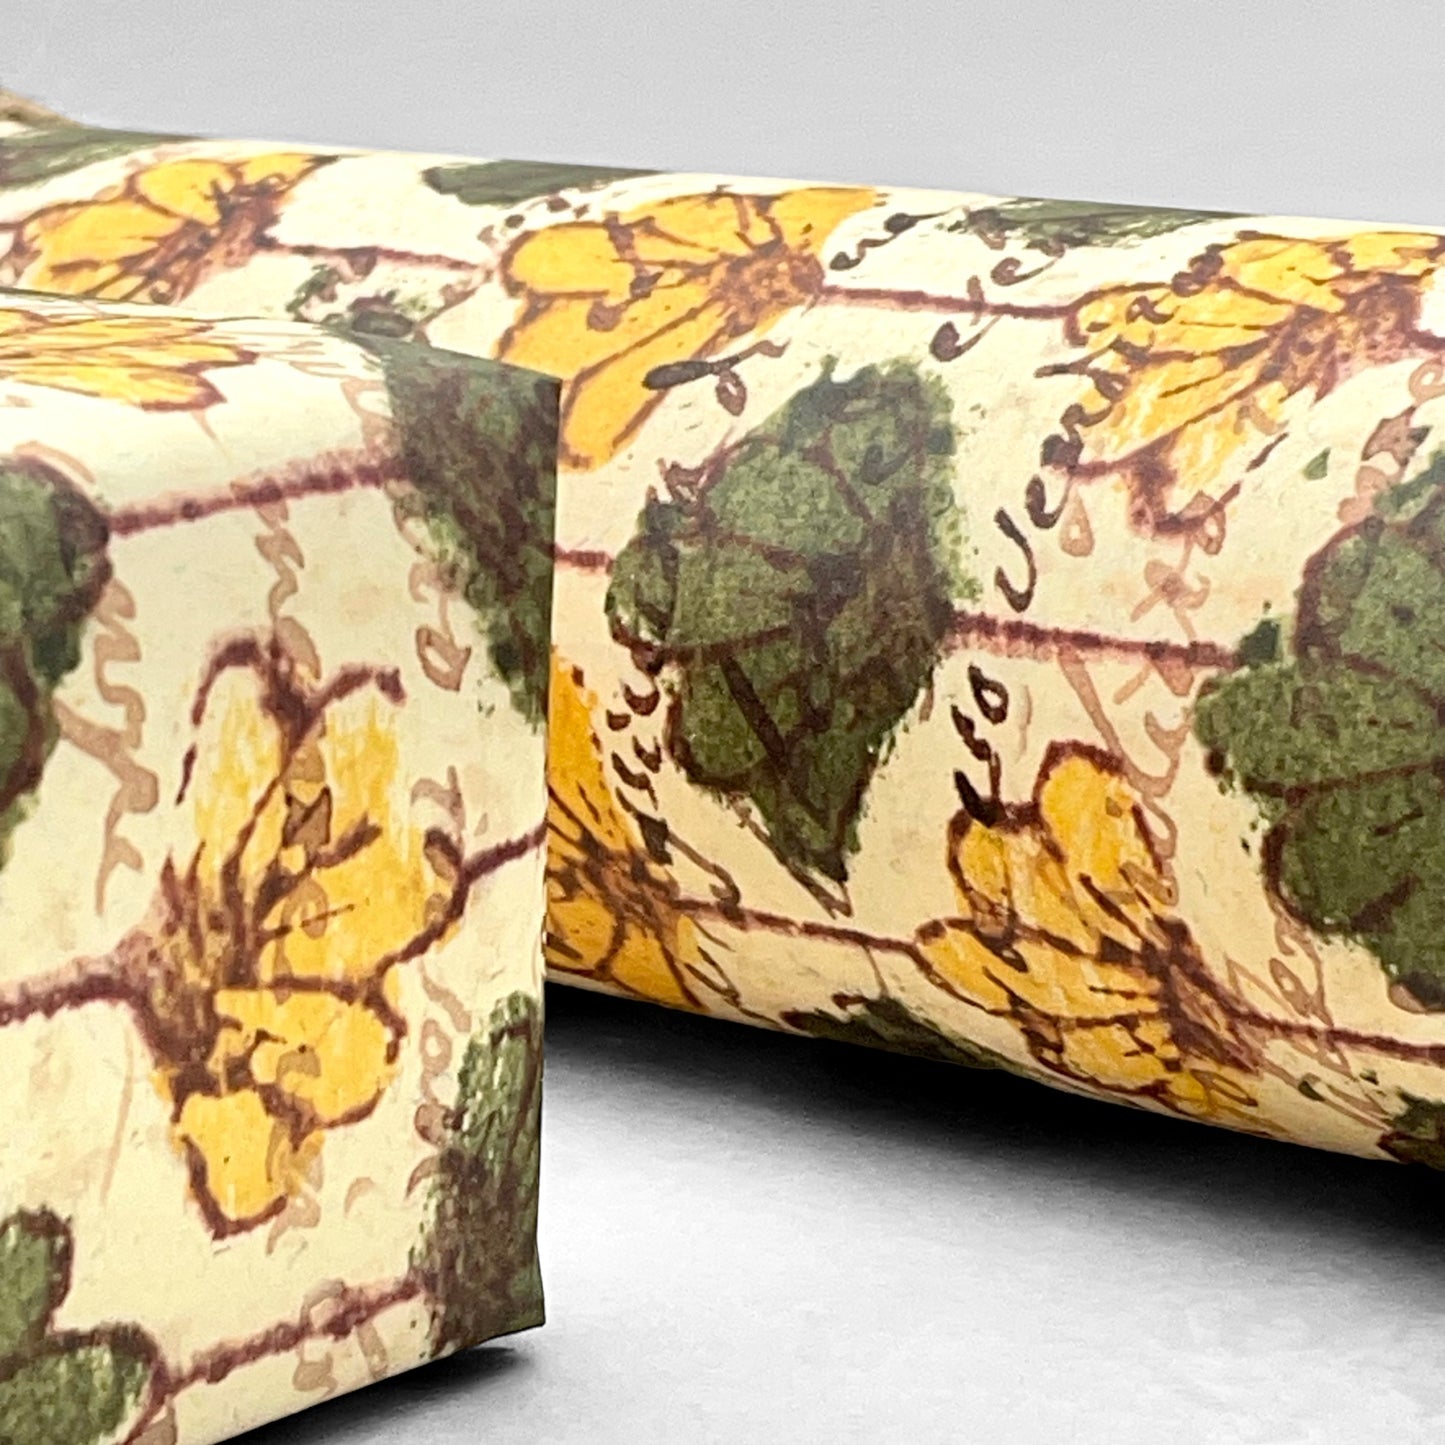 italian Remondini patterned wrapping paper by Tassotti. Repeat floral pattern with yellow and green flowers on a beige background with script writing. Close up